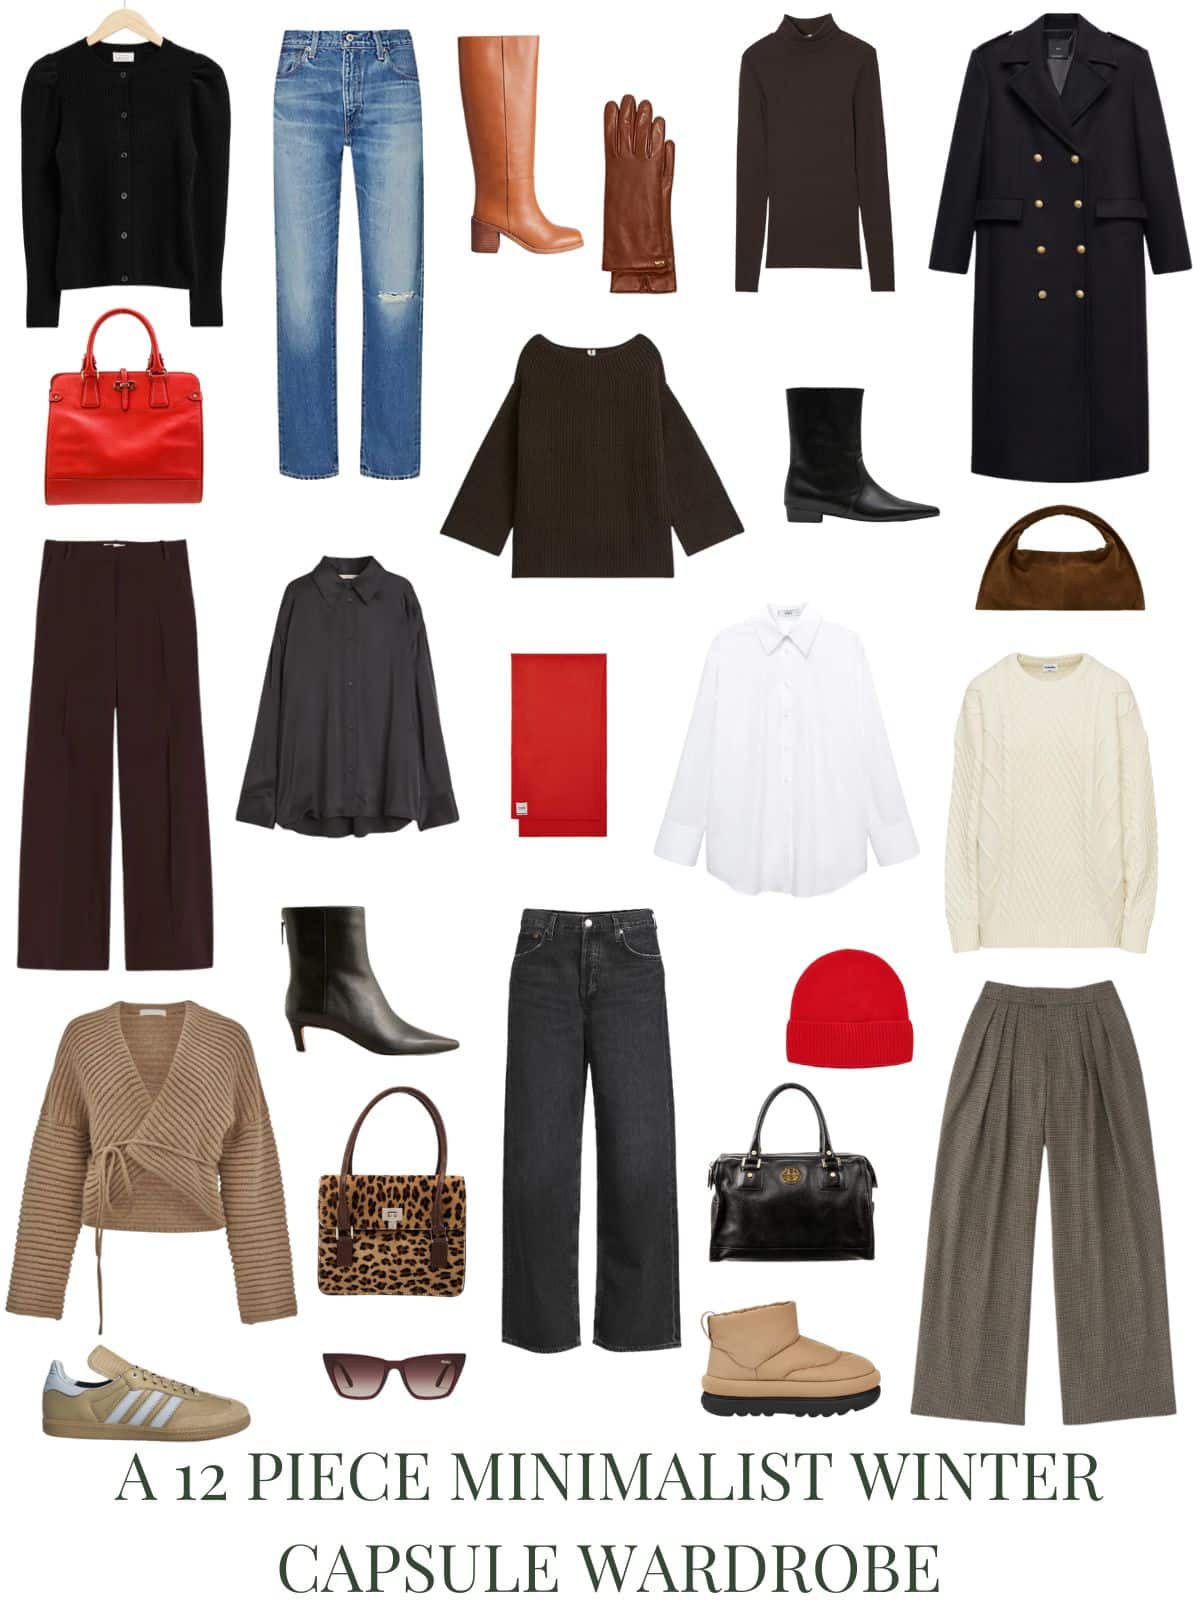 A white background with 12 pieces and accessories for A 12 Piece Minimalist Winter Capsule Wardrobe.